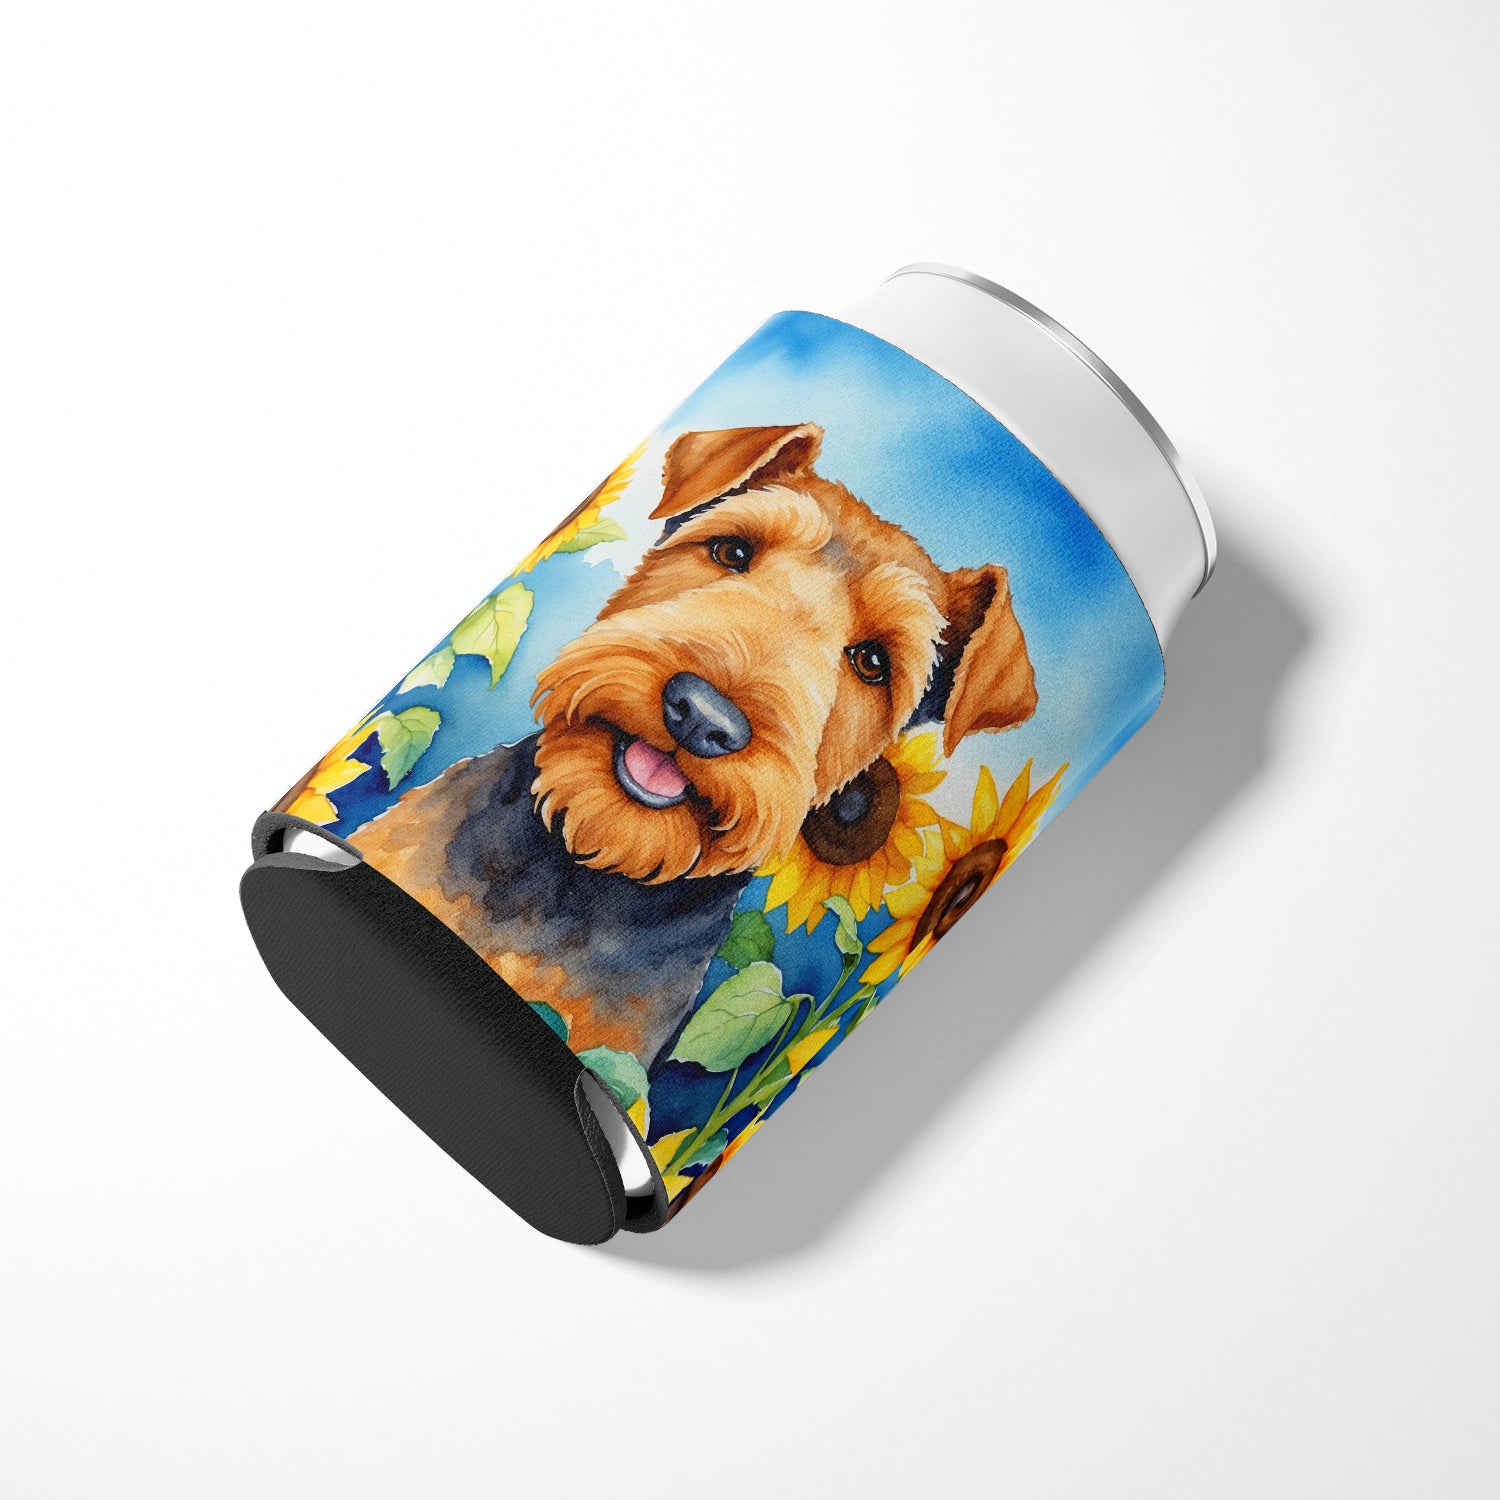 Airedale Terrier in Sunflowers Can or Bottle Hugger